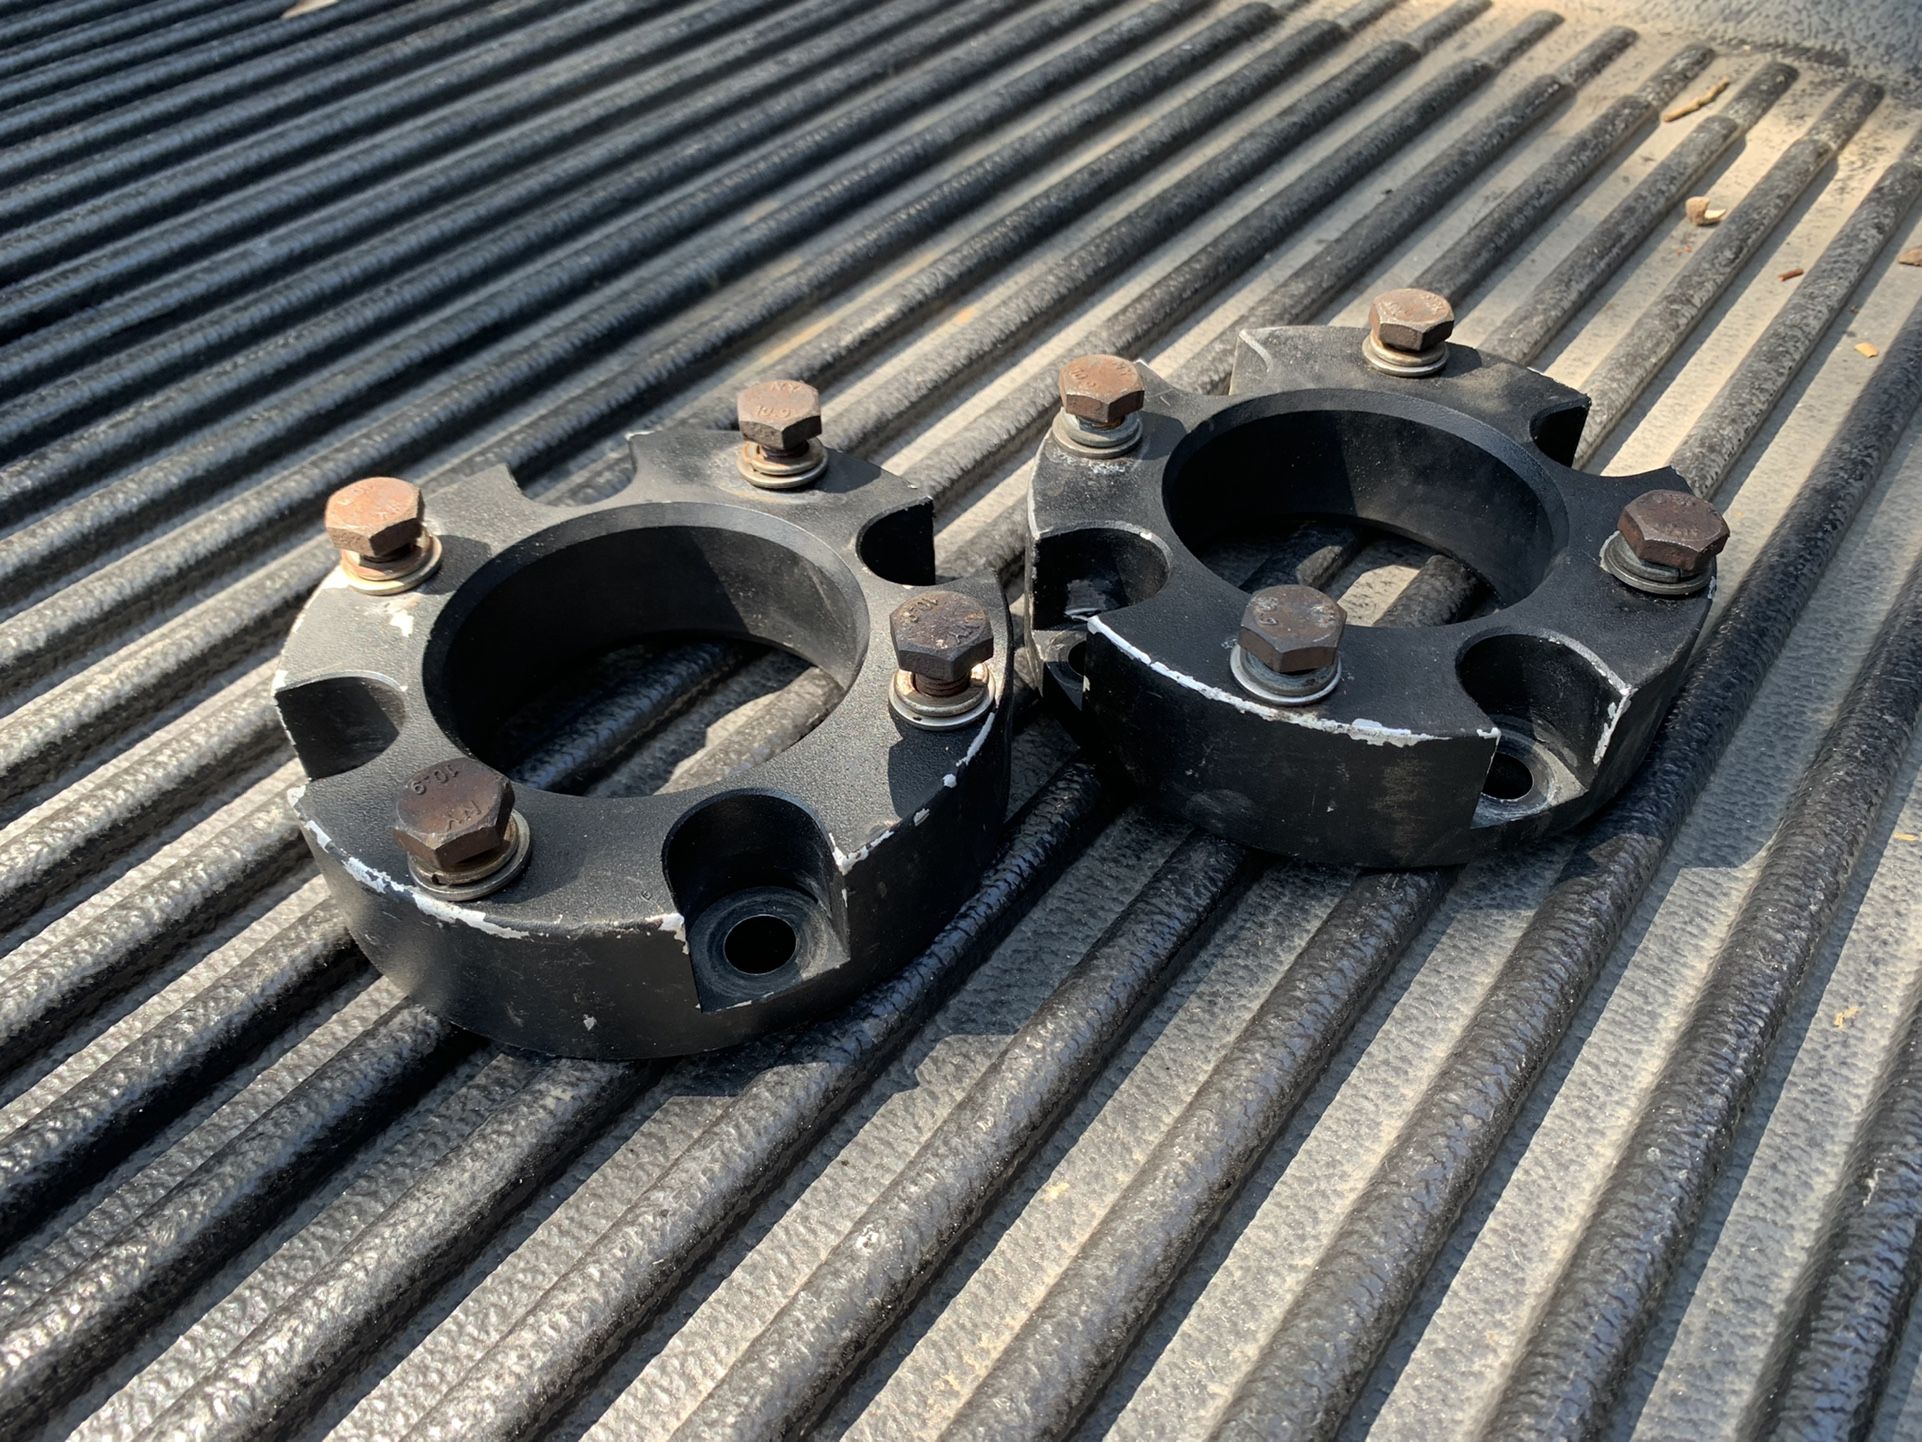 Toyota Tundra coil spacer lift / level kit 